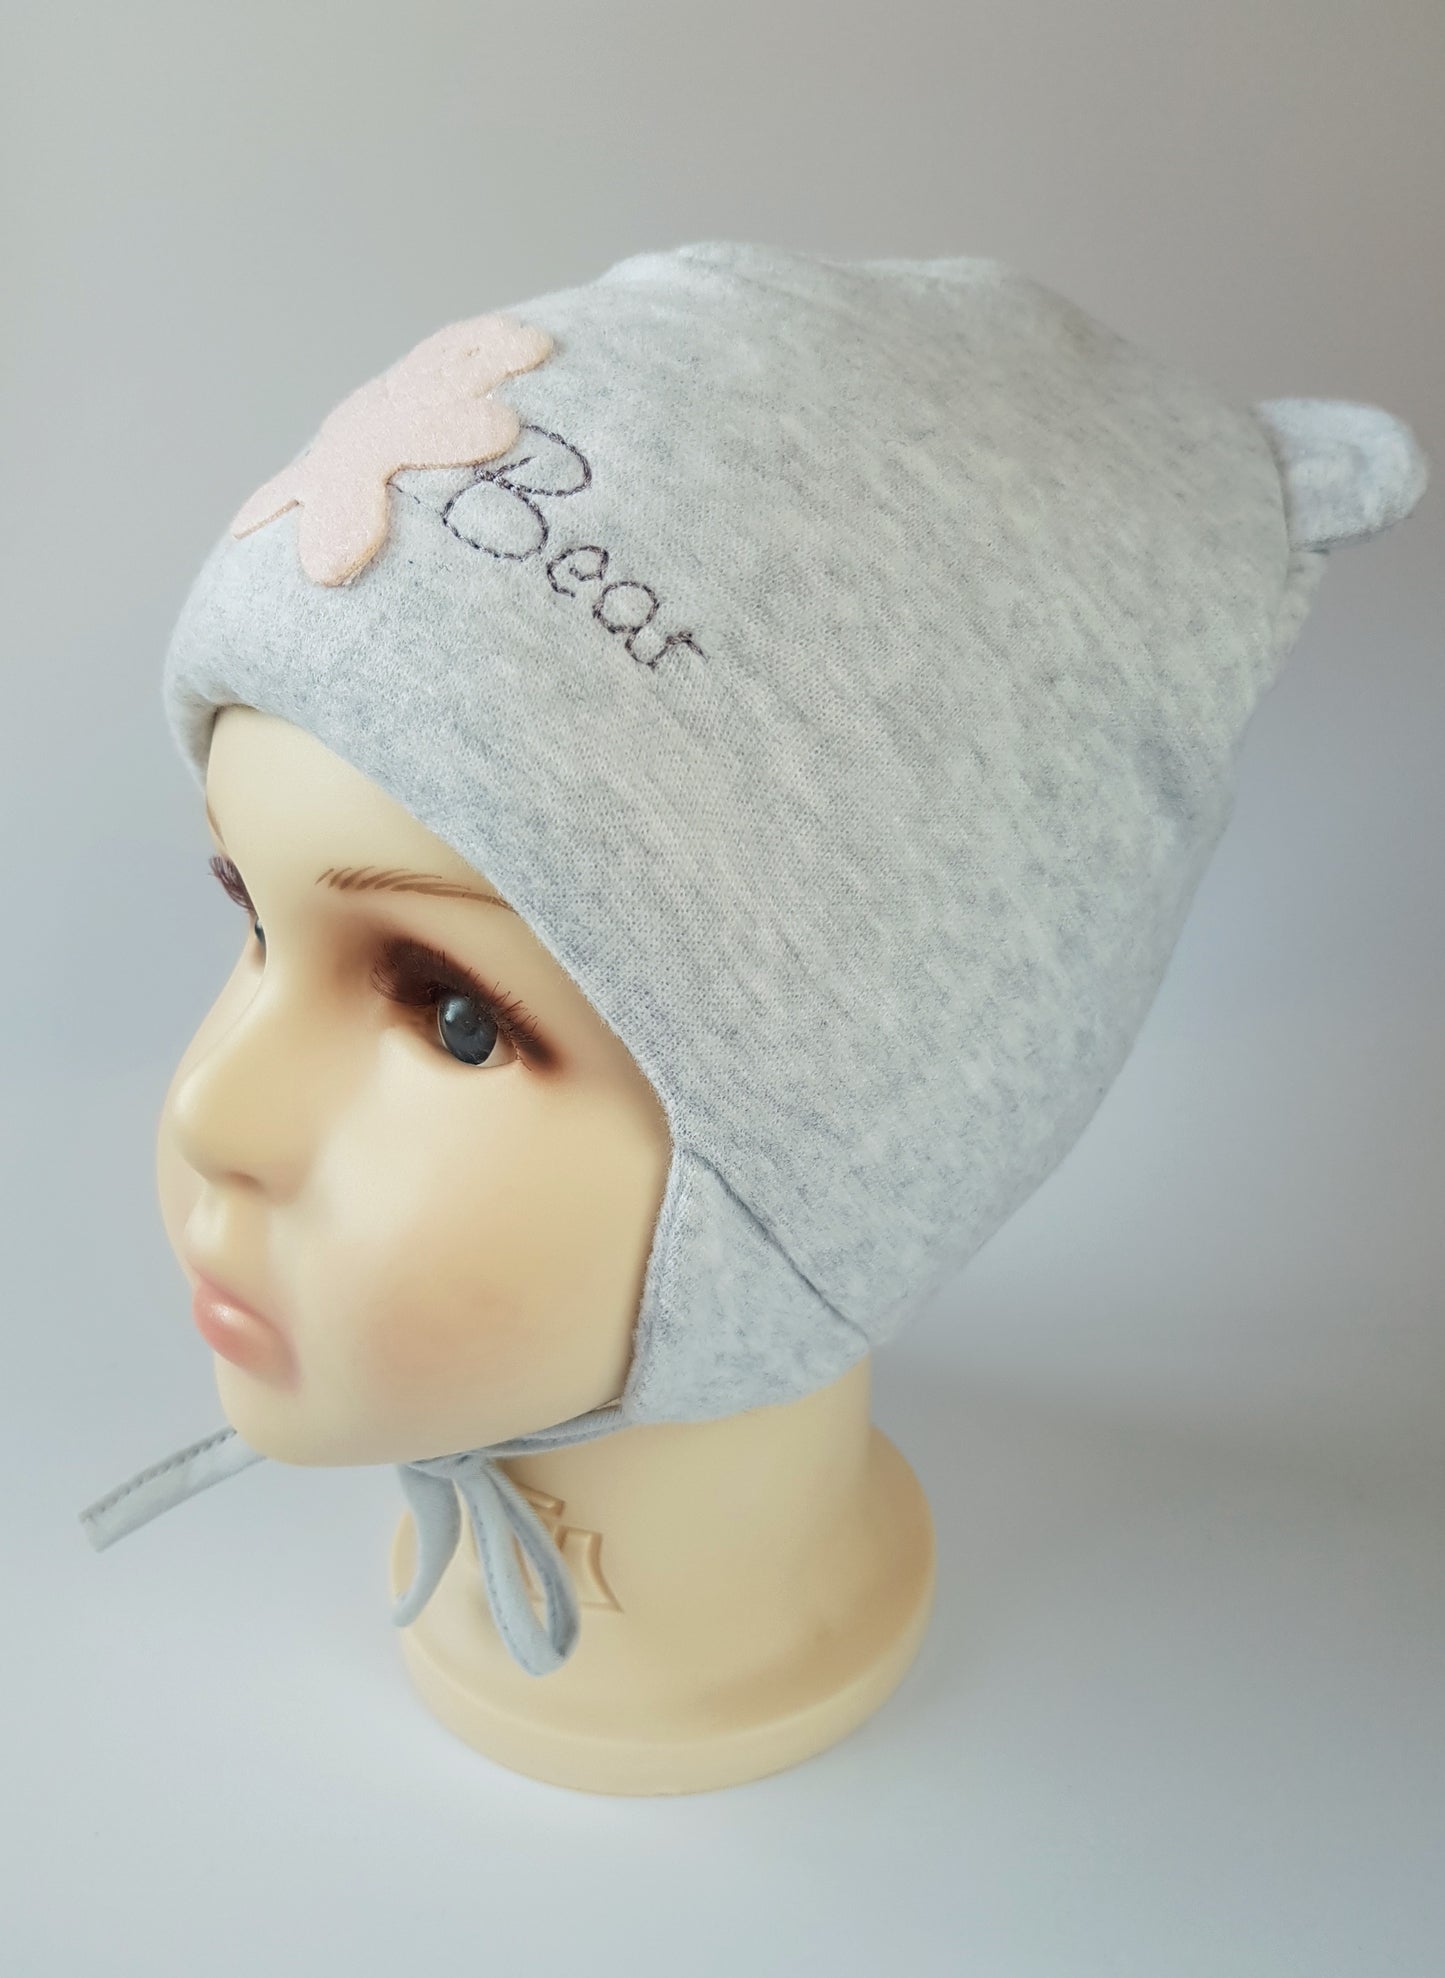 Winter Hats unisex Girls, Boys 6 months to 5 years